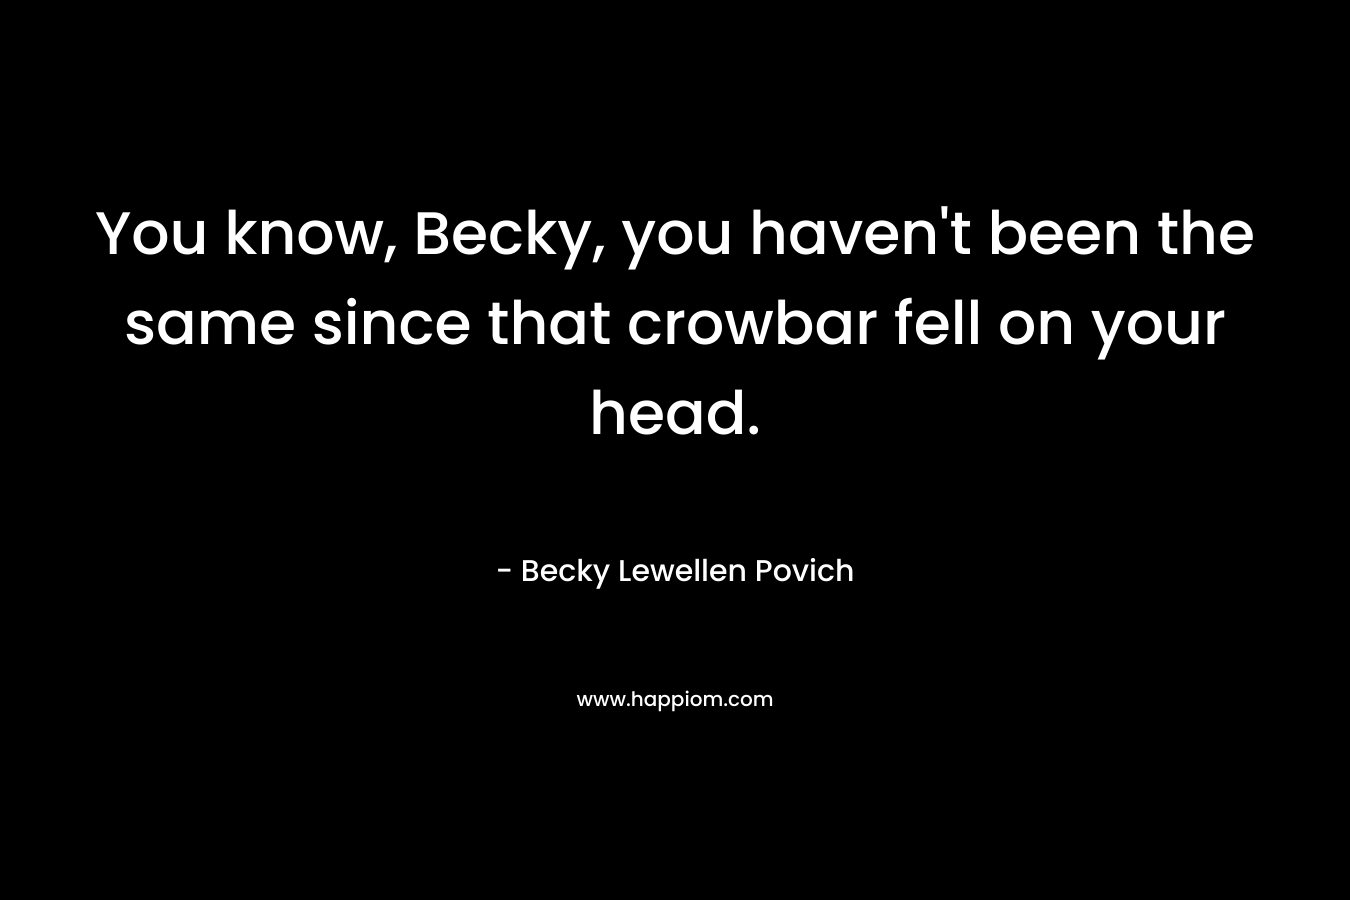 You know, Becky, you haven’t been the same since that crowbar fell on your head. – Becky Lewellen Povich